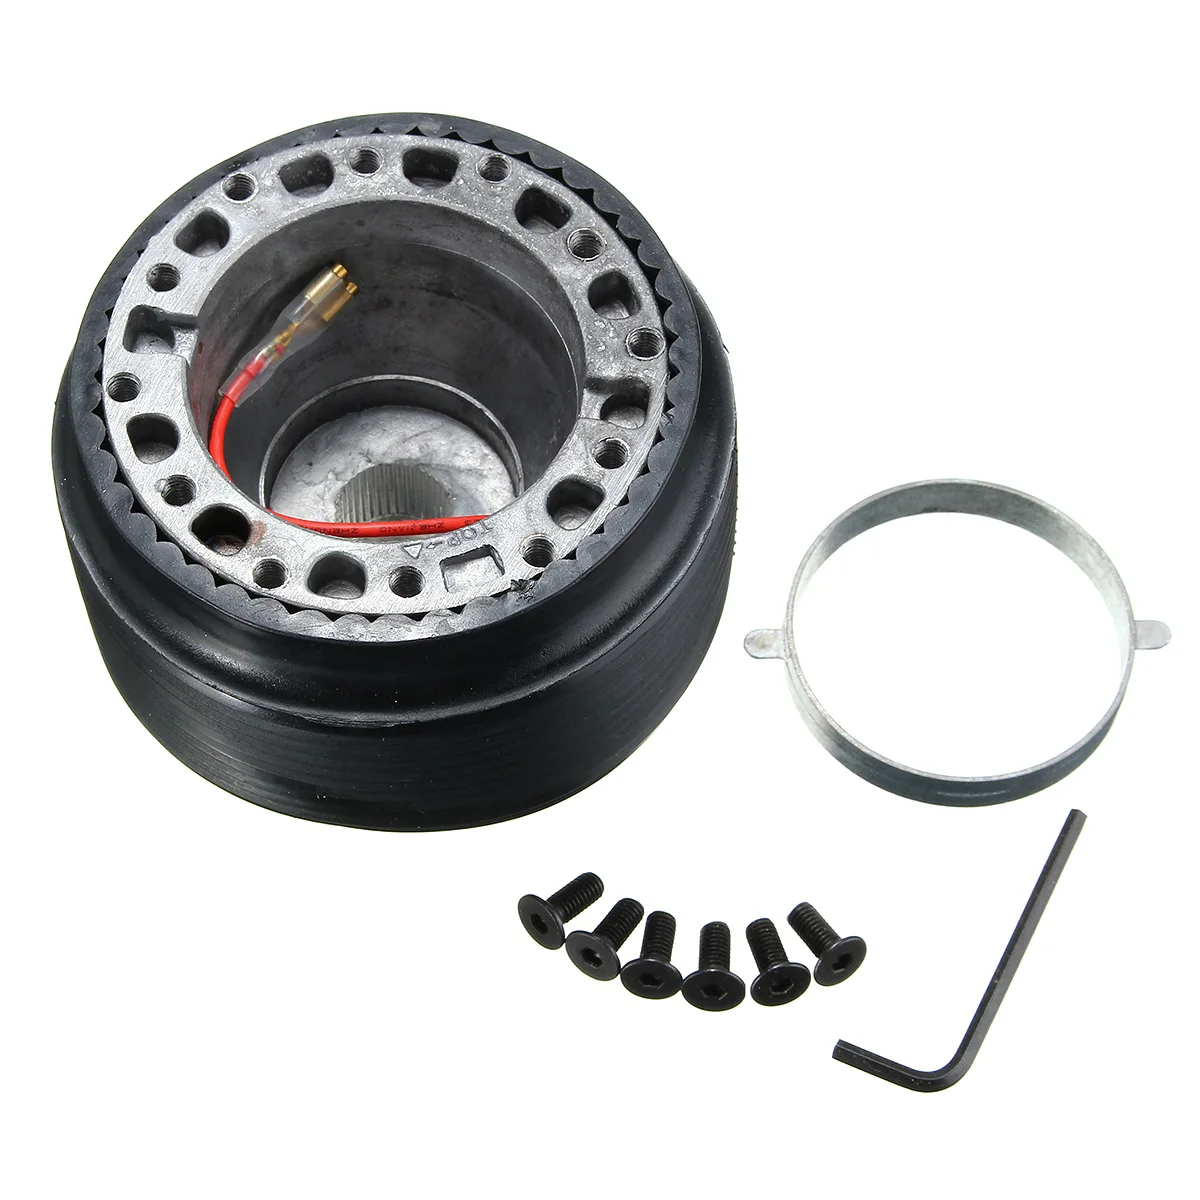 NO LOGO FXF-LGSP Black Steering Wheel Quick Release Short Hub Adapter Fit For RENAULT CLIO MK2 1998-2005 